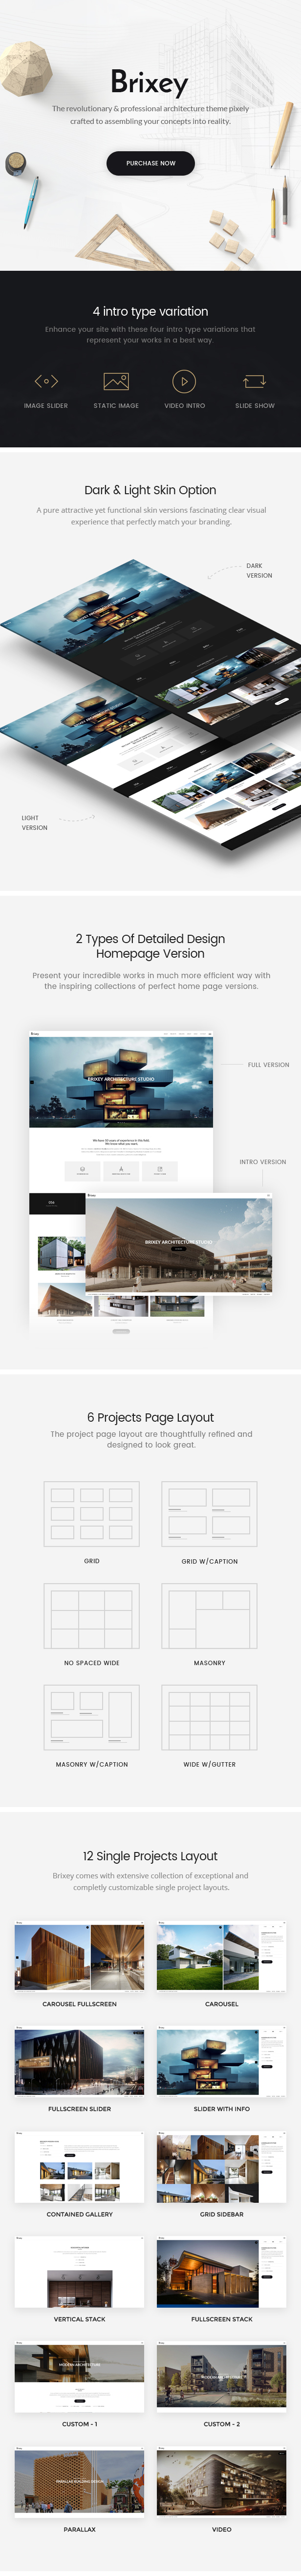 A set of different pages of brixey responsive architecture wordpress theme.